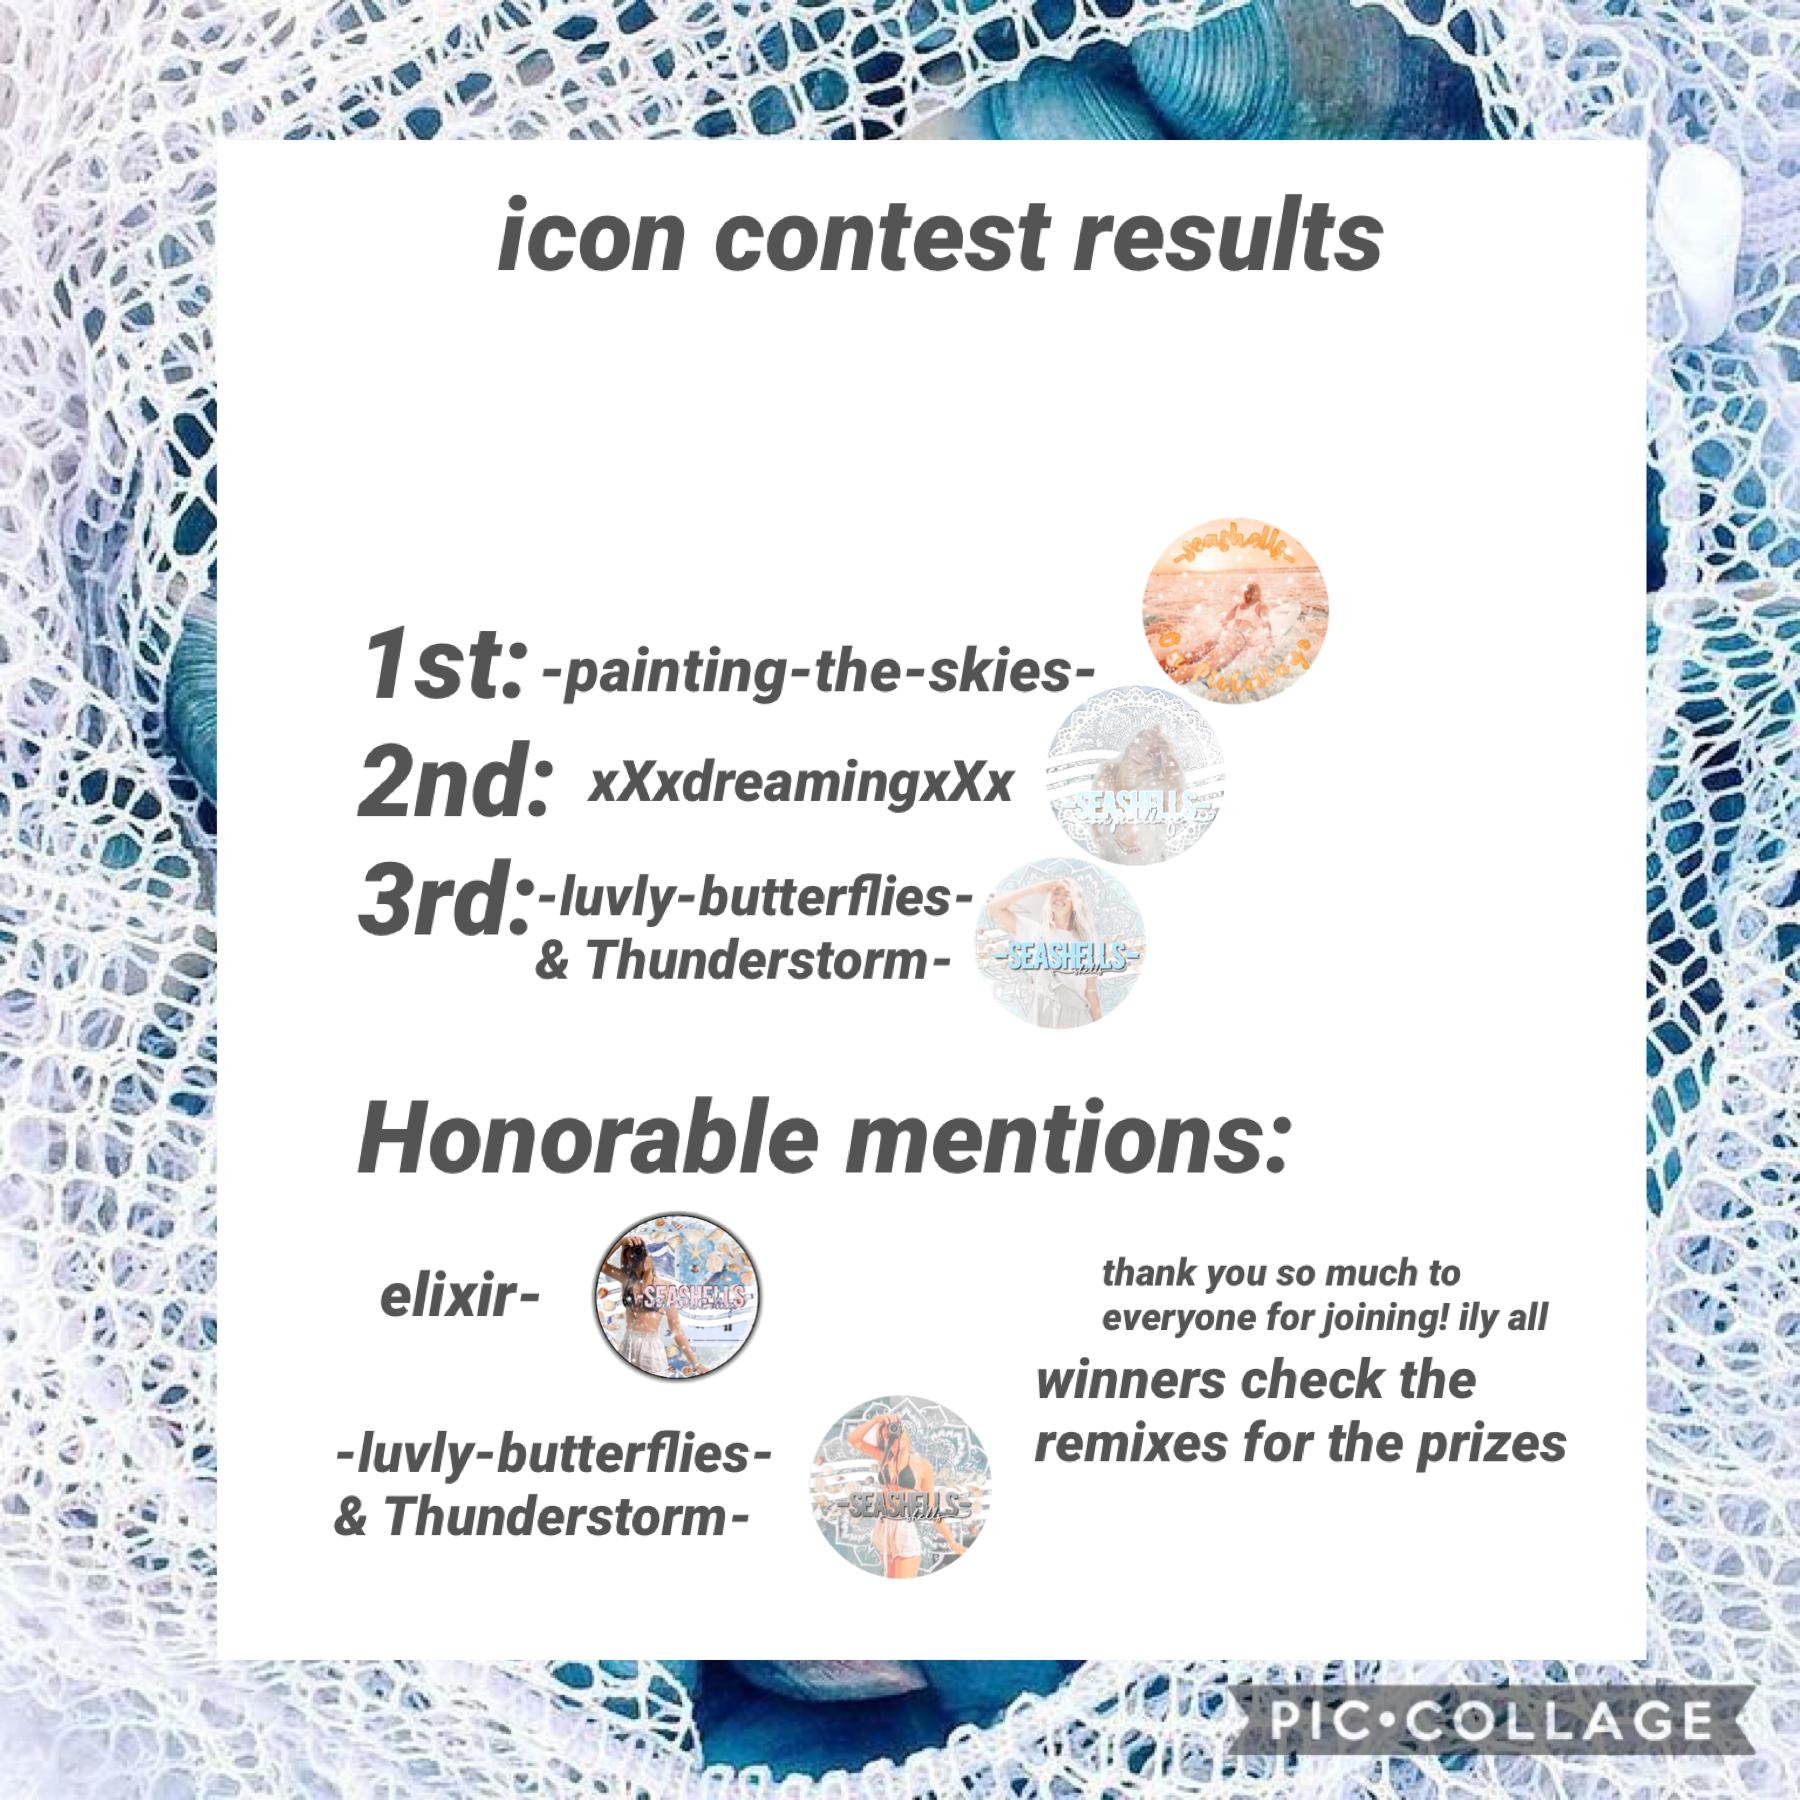 -contest results-